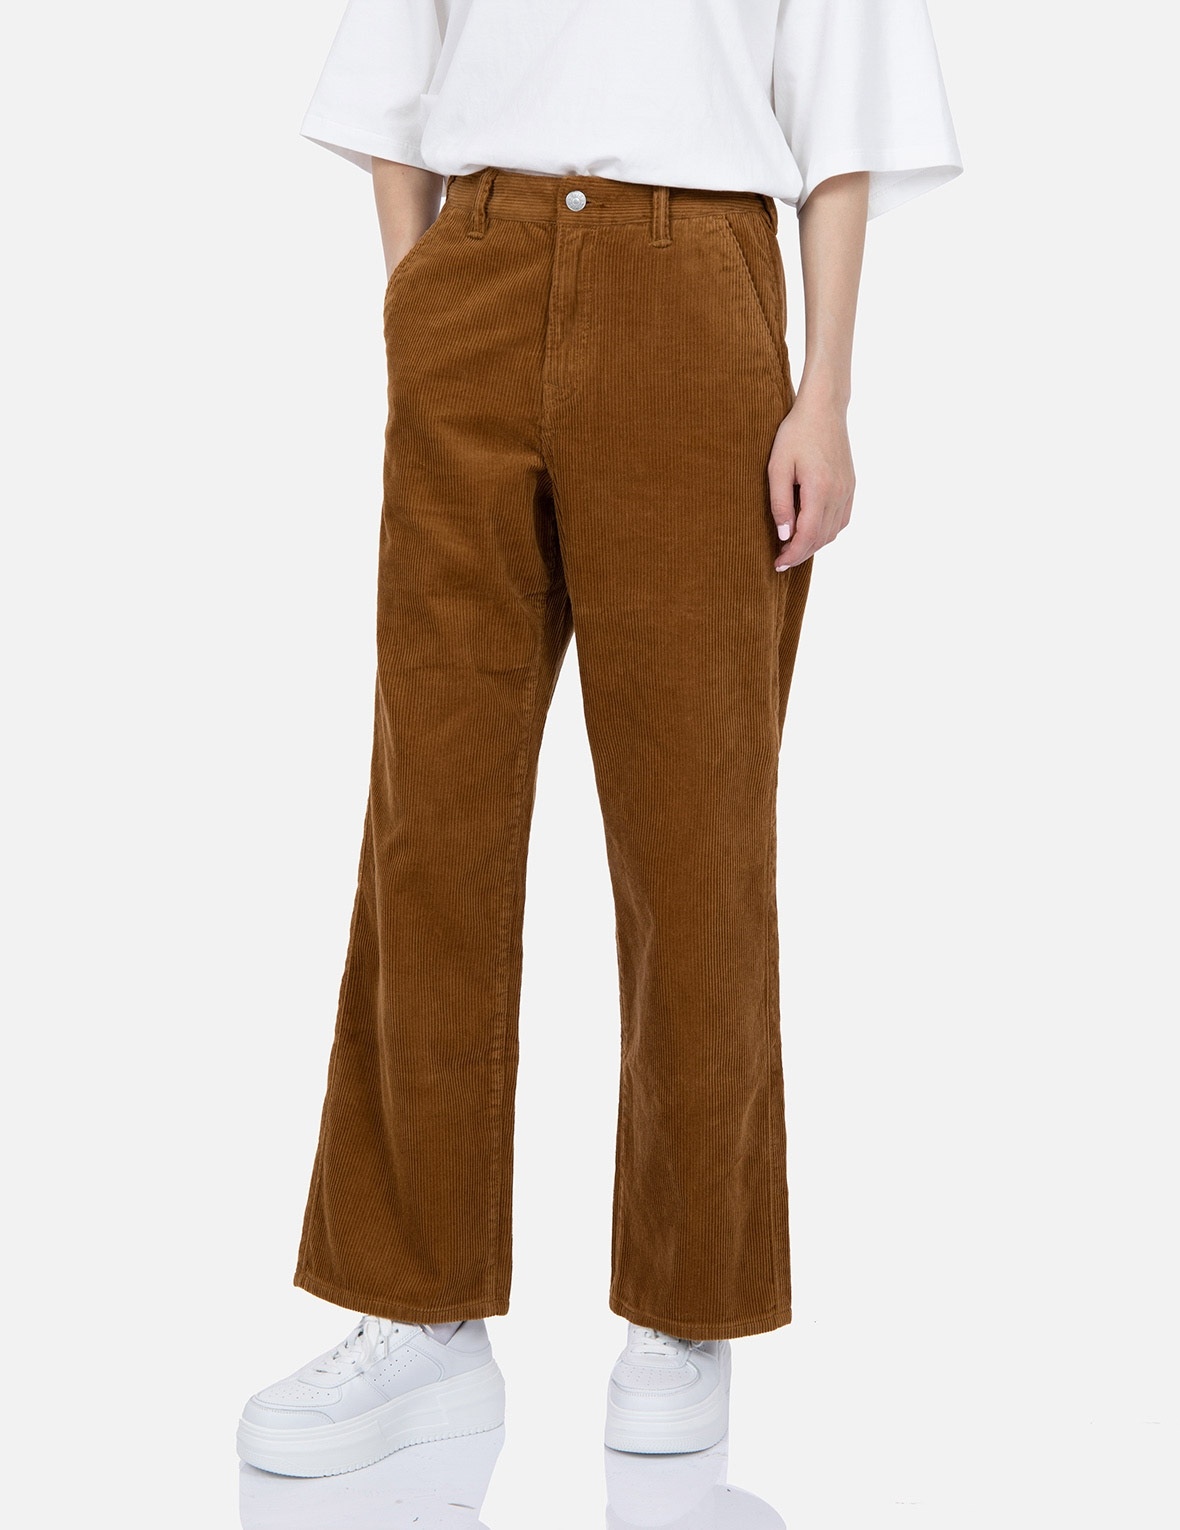 SEAGULL EMBROIDERY STRAIGHT-FIT CORDUROY TROUSERS - 8